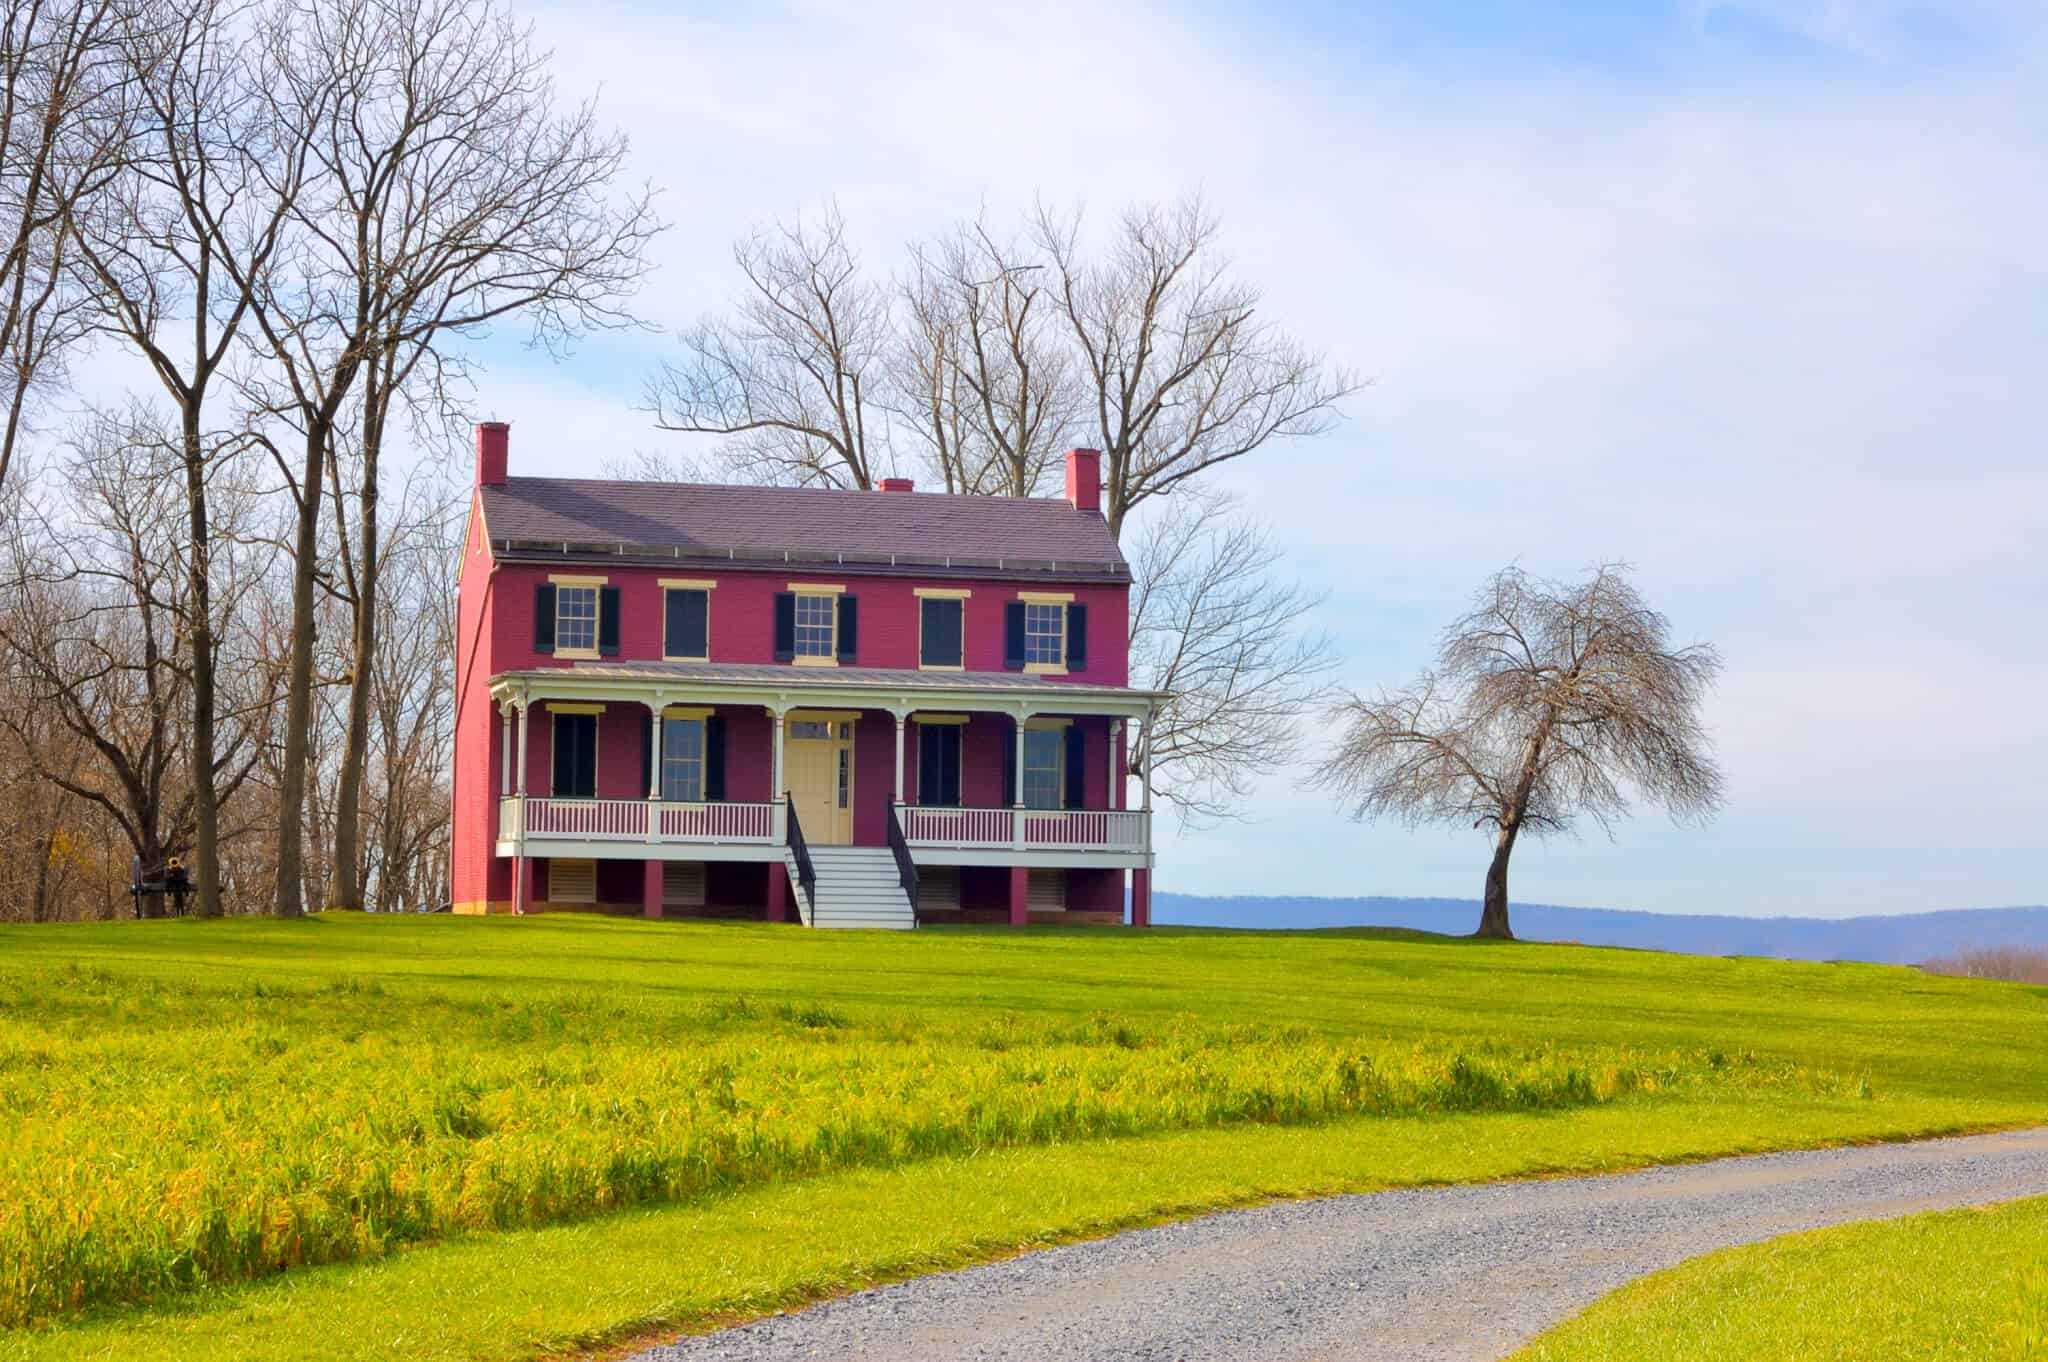 The Worthington house was occupied by the Union Army during the Battle of the Monocacy during the US Civil War. It is restored and preserved as a National Park and this gives the flavor of its appearance during the late 1800s